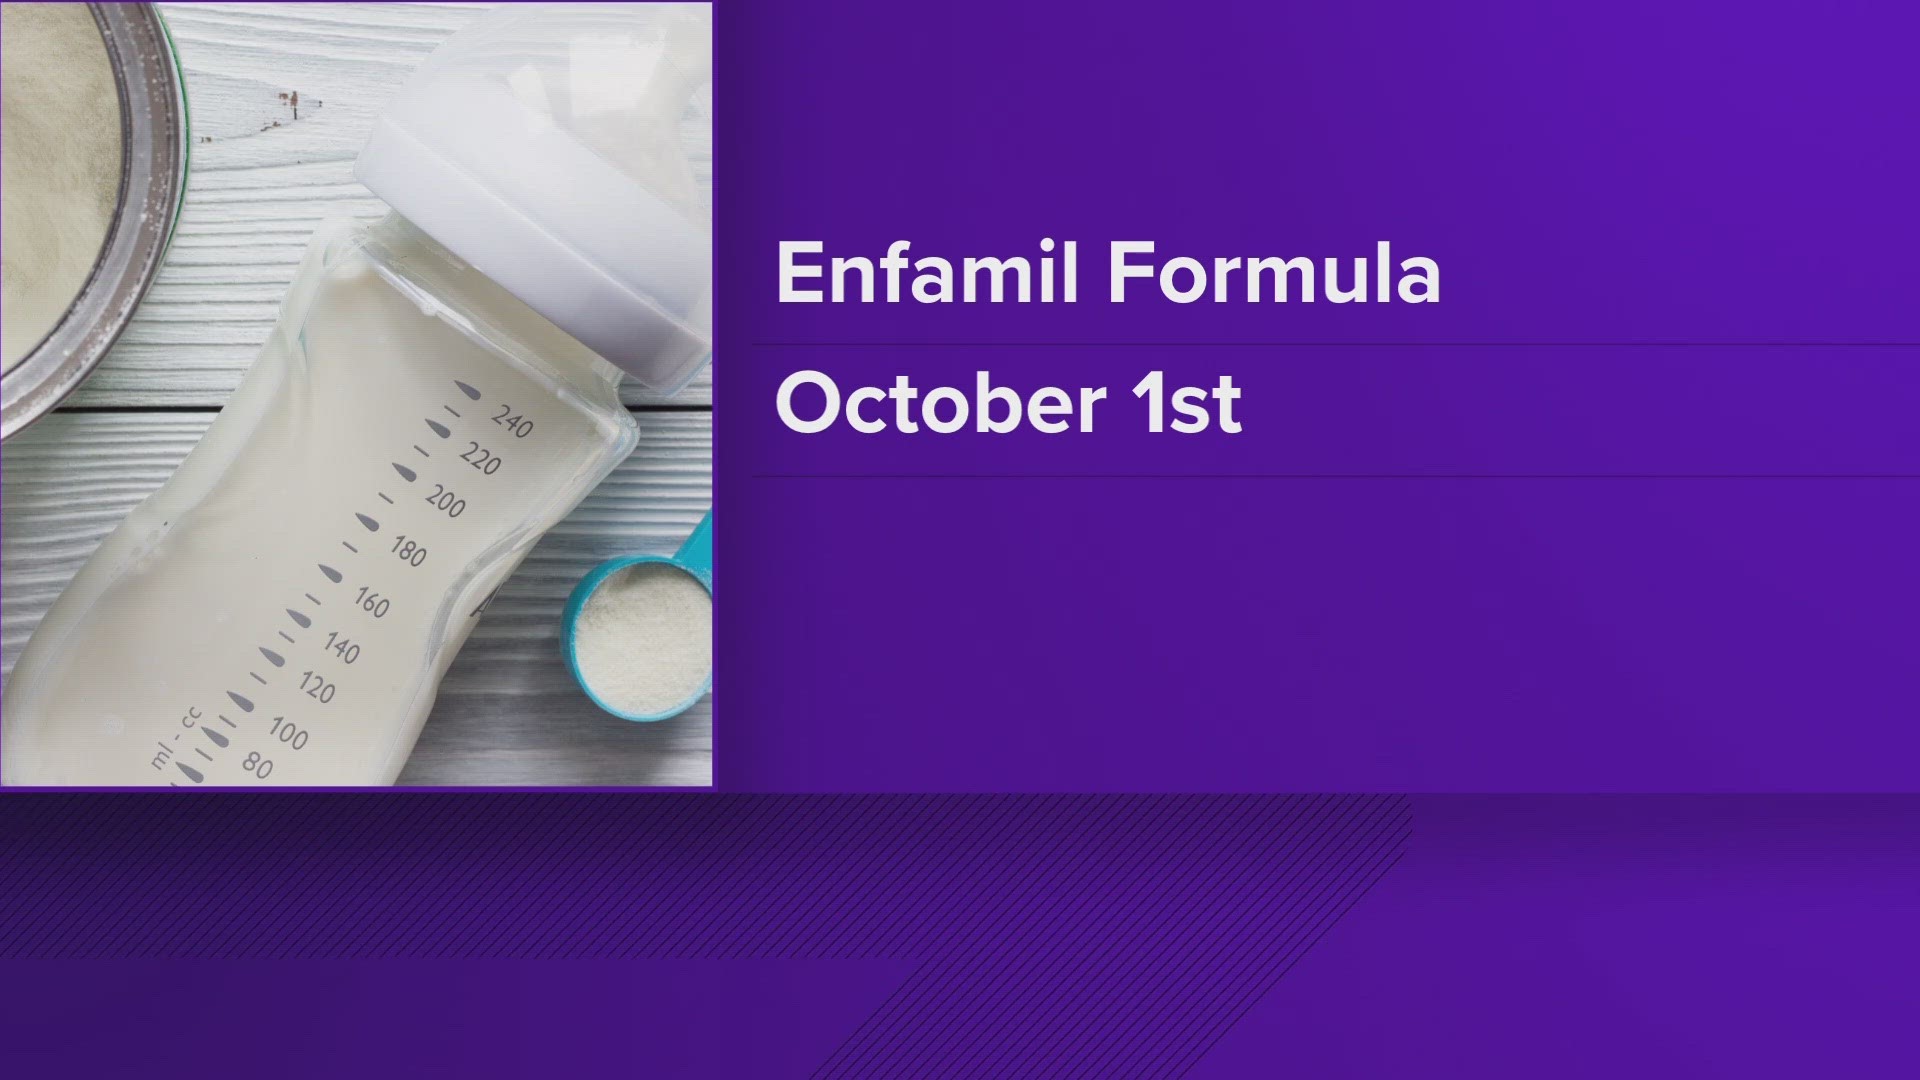 The switch is happening Oct. 1. That means the 24,000 people who count on WIC for formula will receive similar Enfamil products.